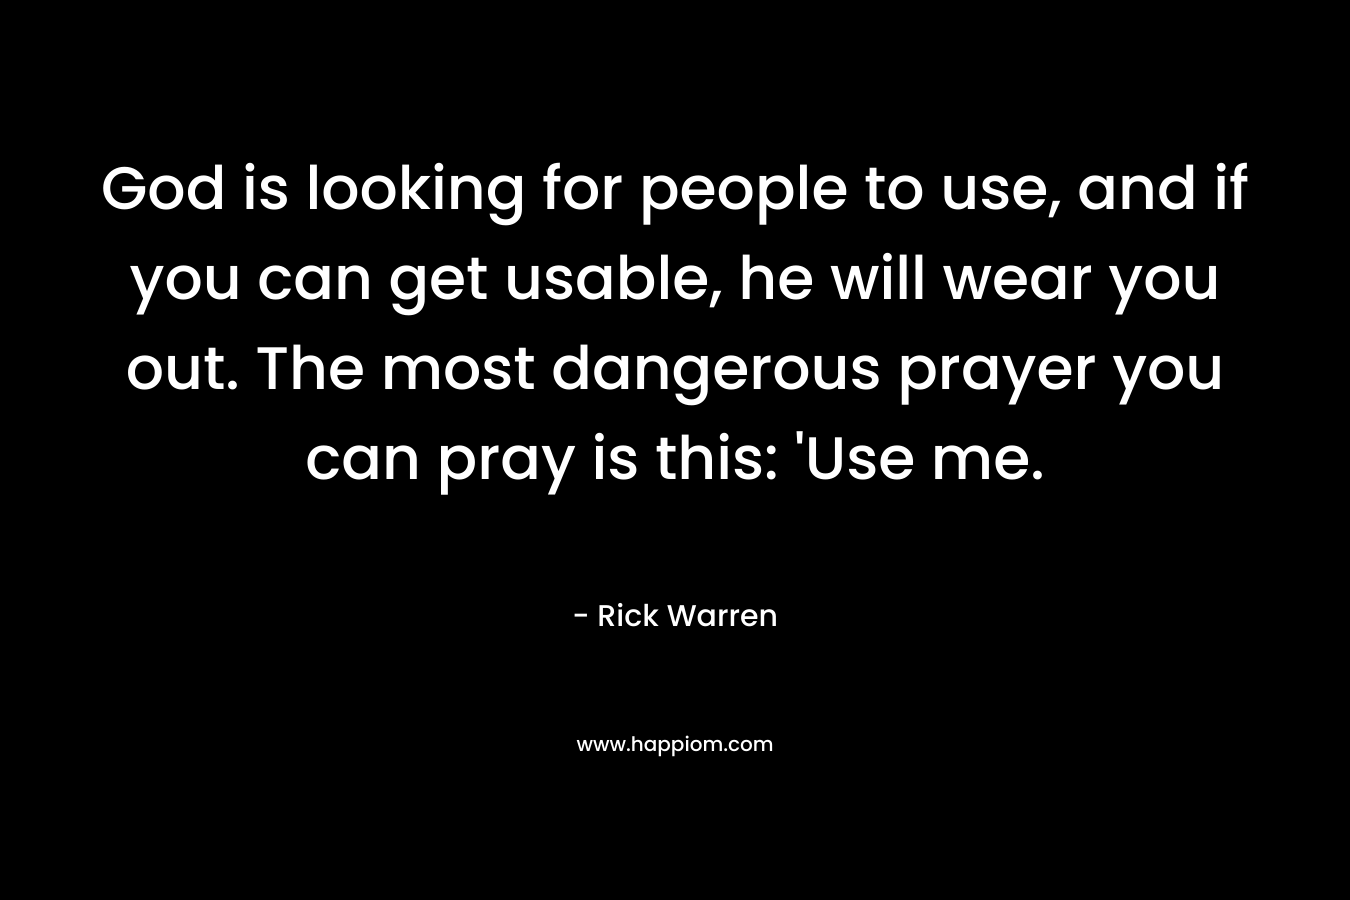 God is looking for people to use, and if you can get usable, he will wear you out. The most dangerous prayer you can pray is this: 'Use me.